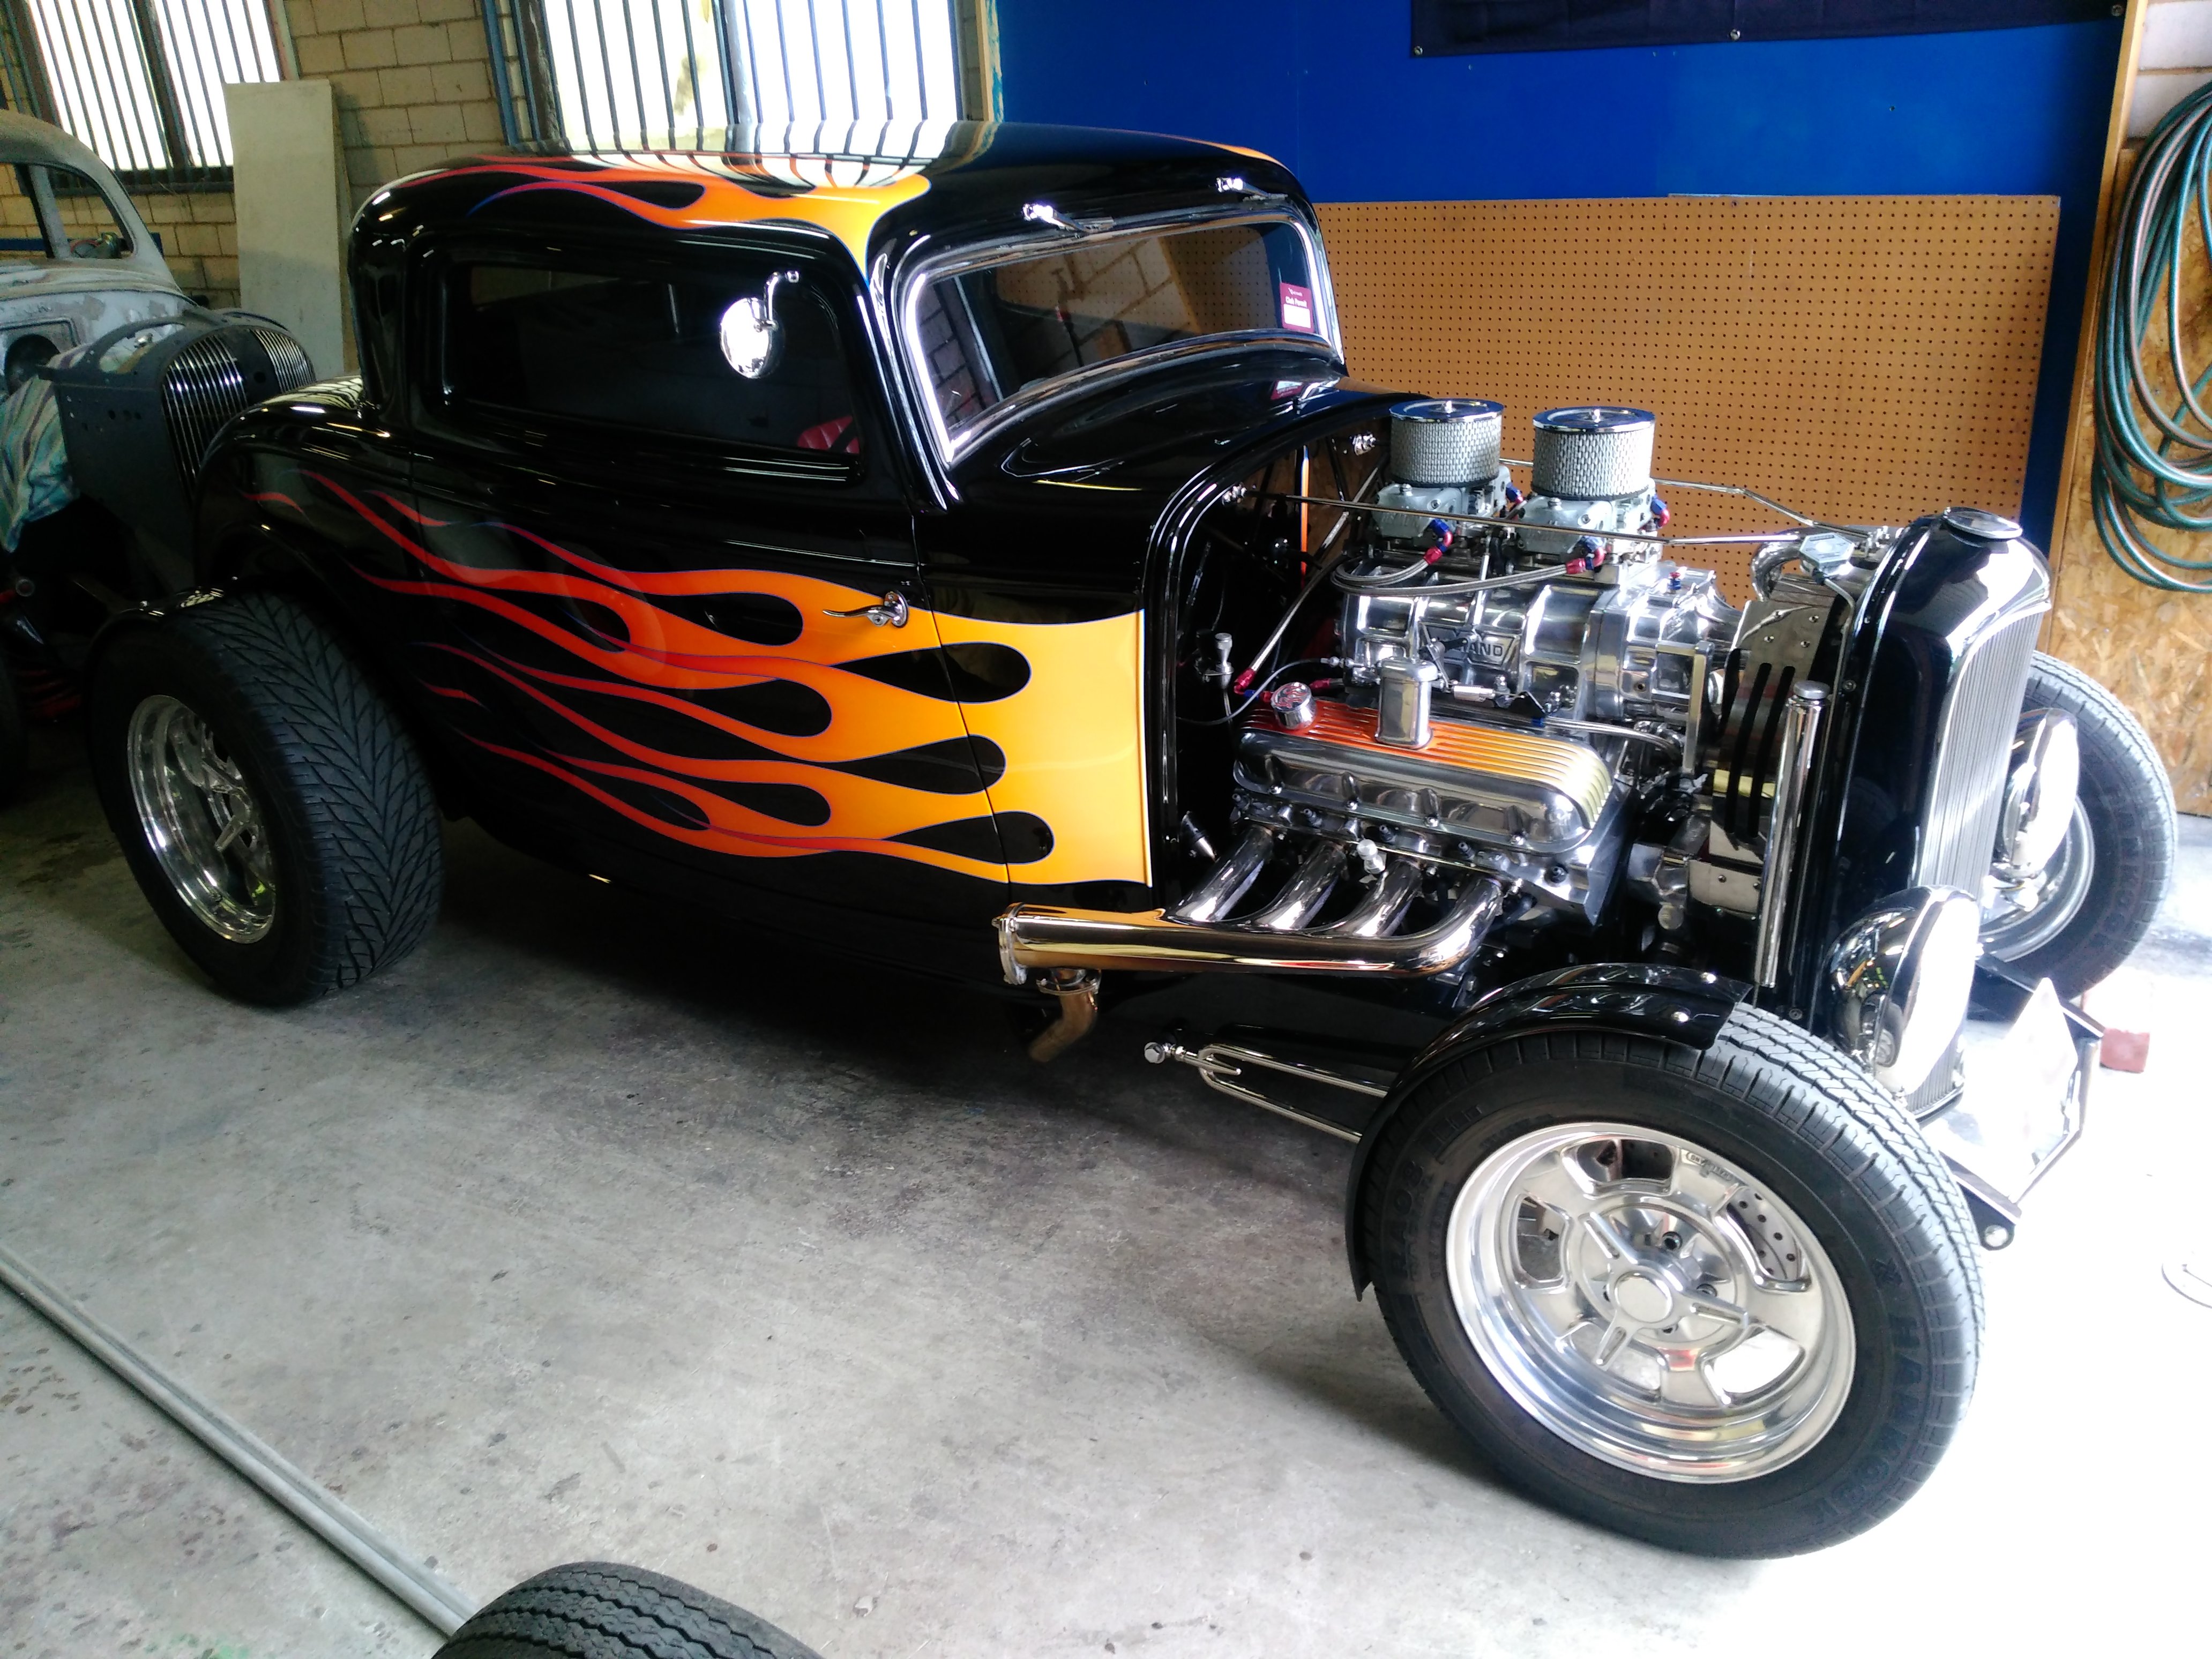 Hot Rod maintenance and ride quality tuning